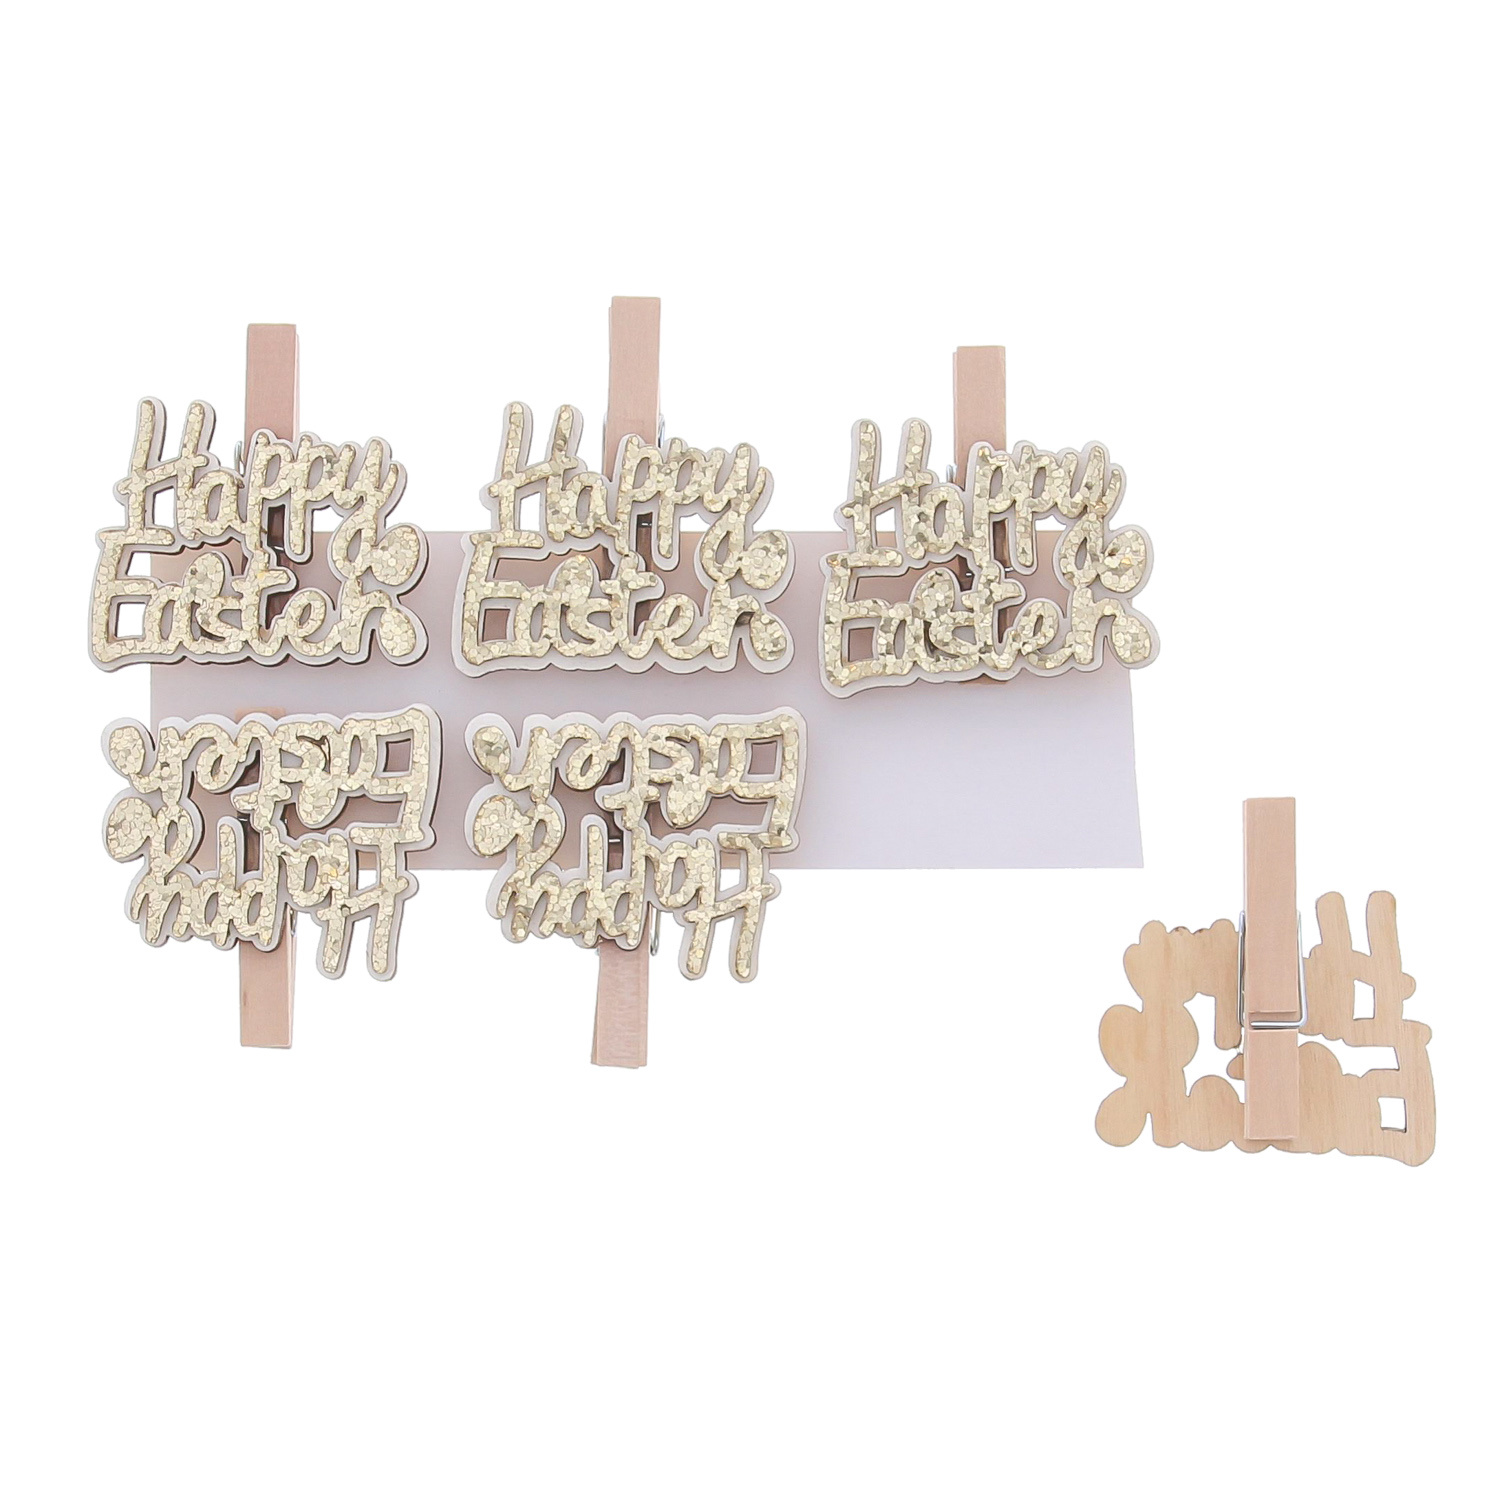 "Happy Easter" clip gold 45*14*48mm- 36 pieces